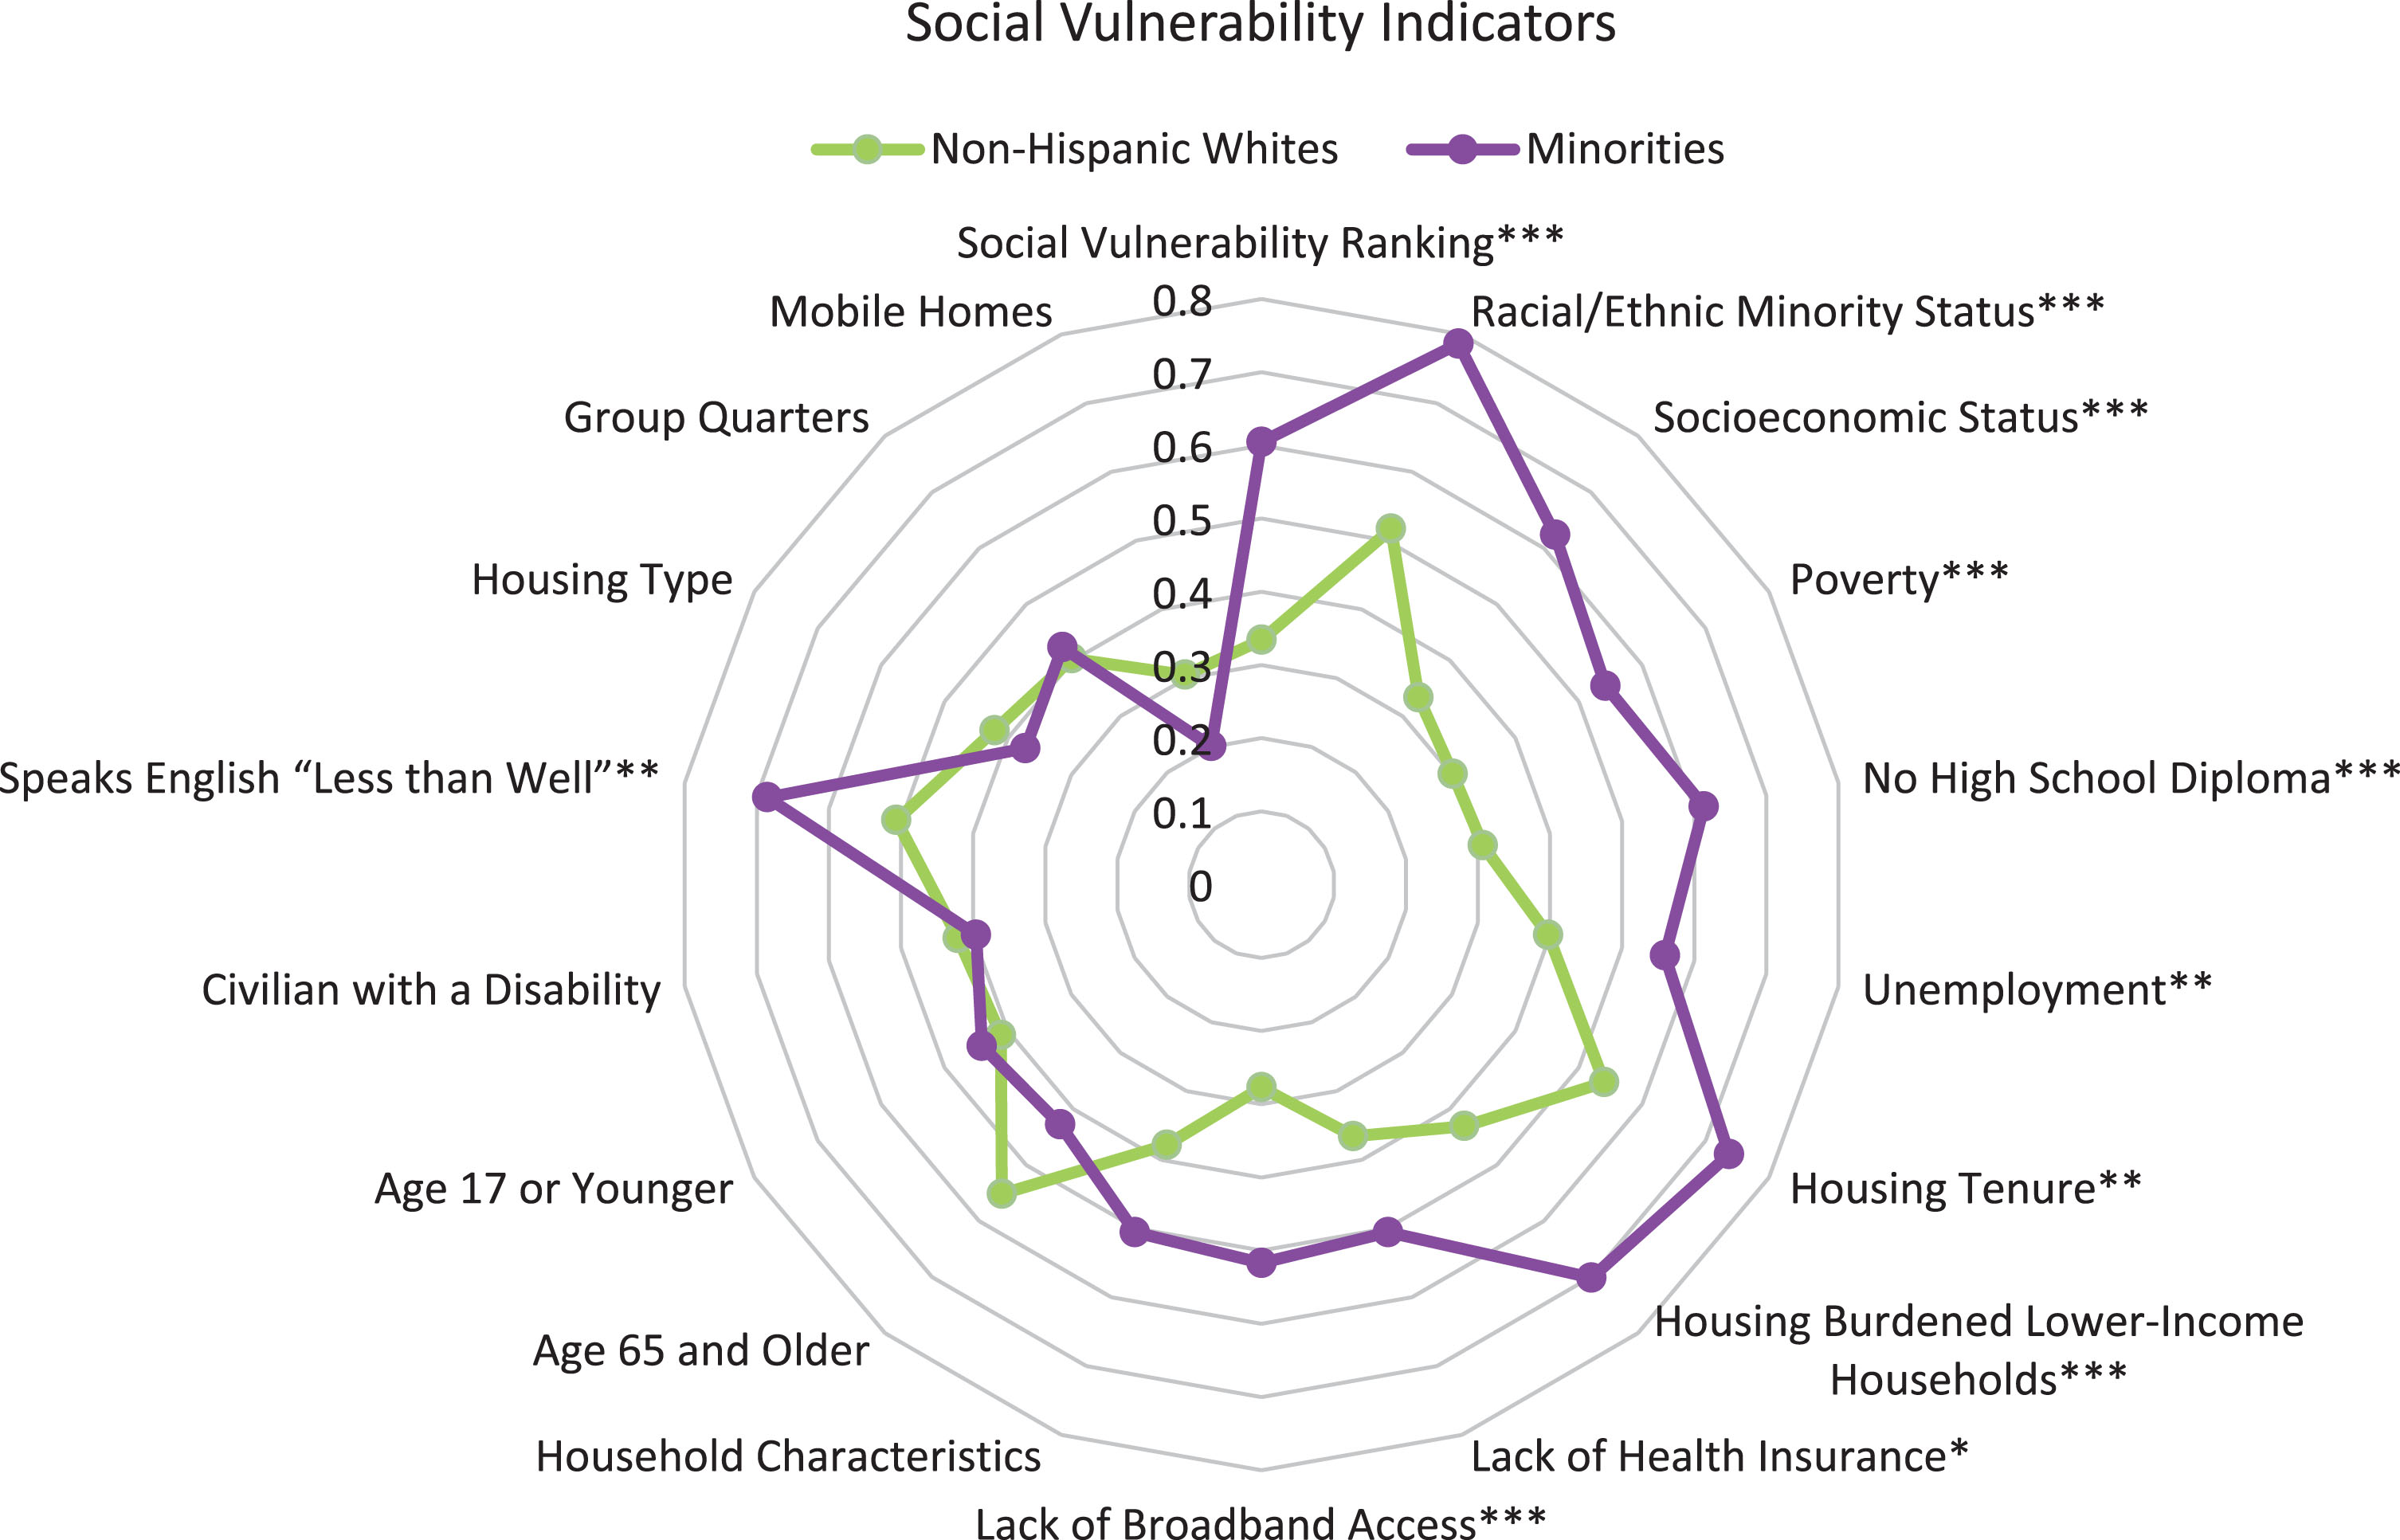 Figure portrays the mean values of all Social Vulnerability indicators by race/ethnicity. Minority participants had significantly higher ranking for several variables compared to non-Hispanic white participants, indicating greater deprivation in these geographic areas: overall social vulnerability, racial/ethnic minority status, socioeconomic status, poverty, no high school diploma, unemployment, housing tenure, housing burdened lower-income households, lack of health insurance, lack of broadband access, and speaks English “less than well”. Significance is represented by the asterisks (*p < 0.05, **p < 0.01, ***p < 0.001).